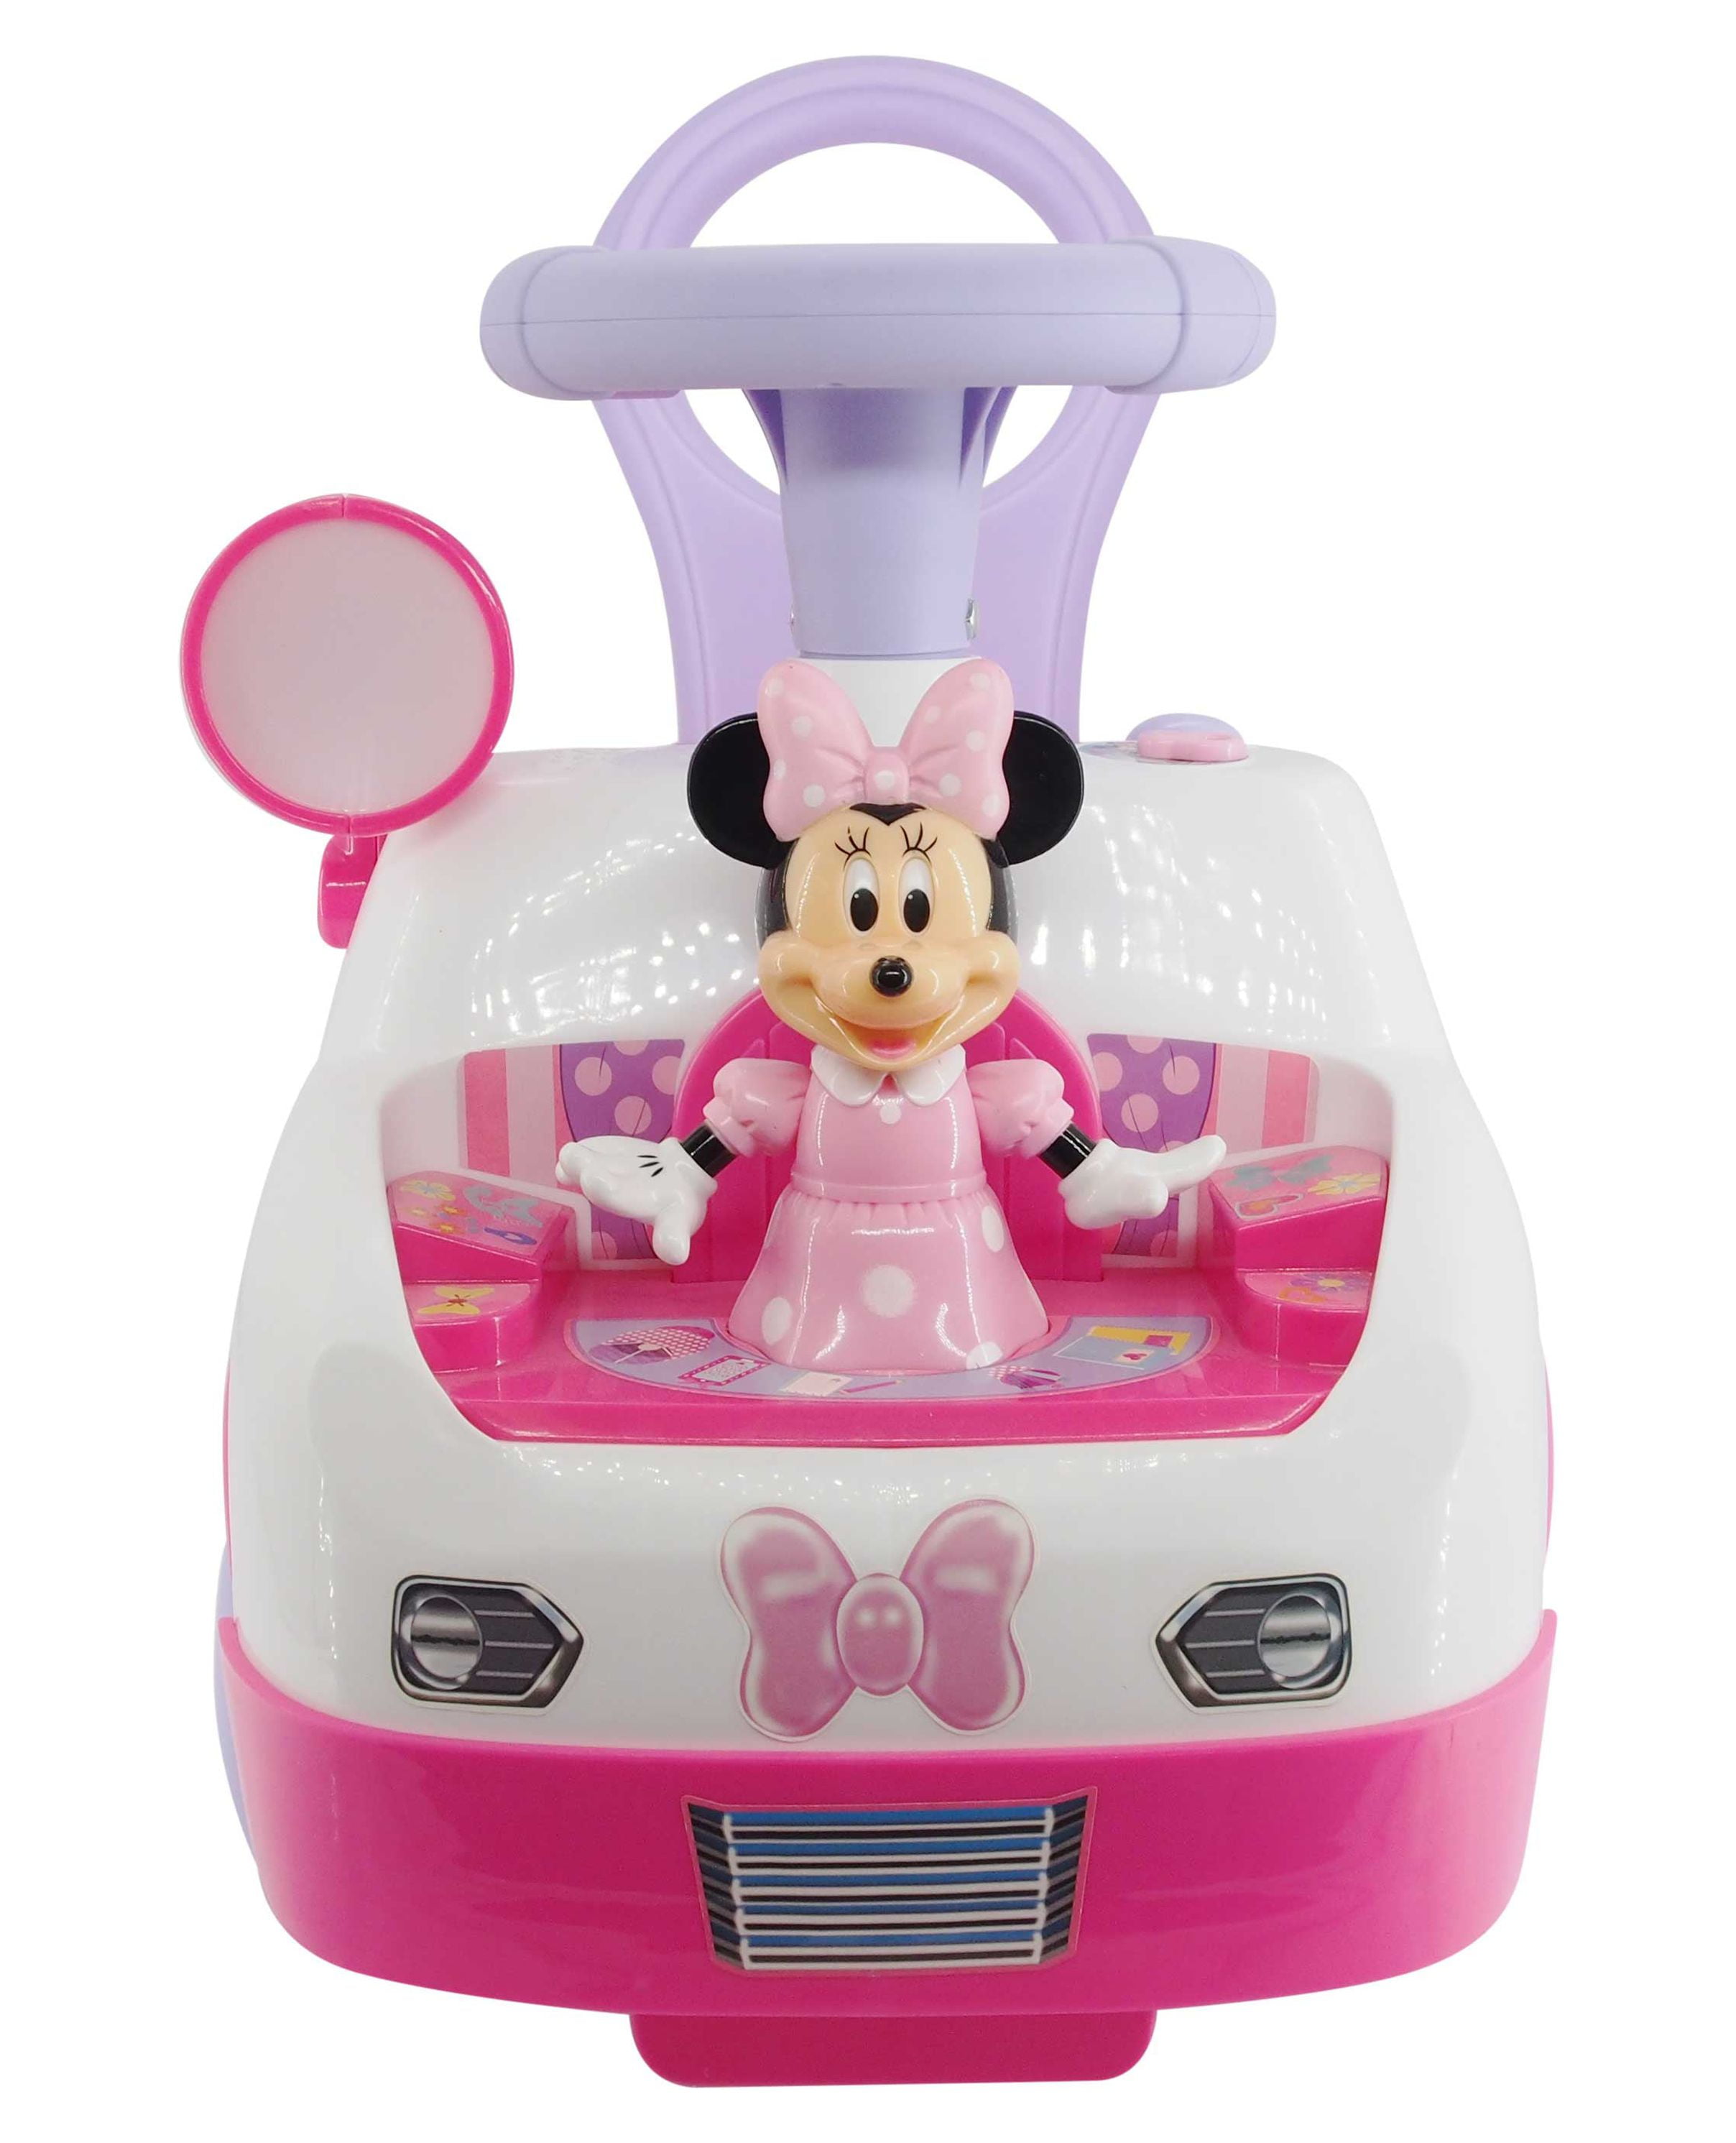 Car with Minnie Dancing Sounds Interactive Mouse Kiddieland Ride-On Activity